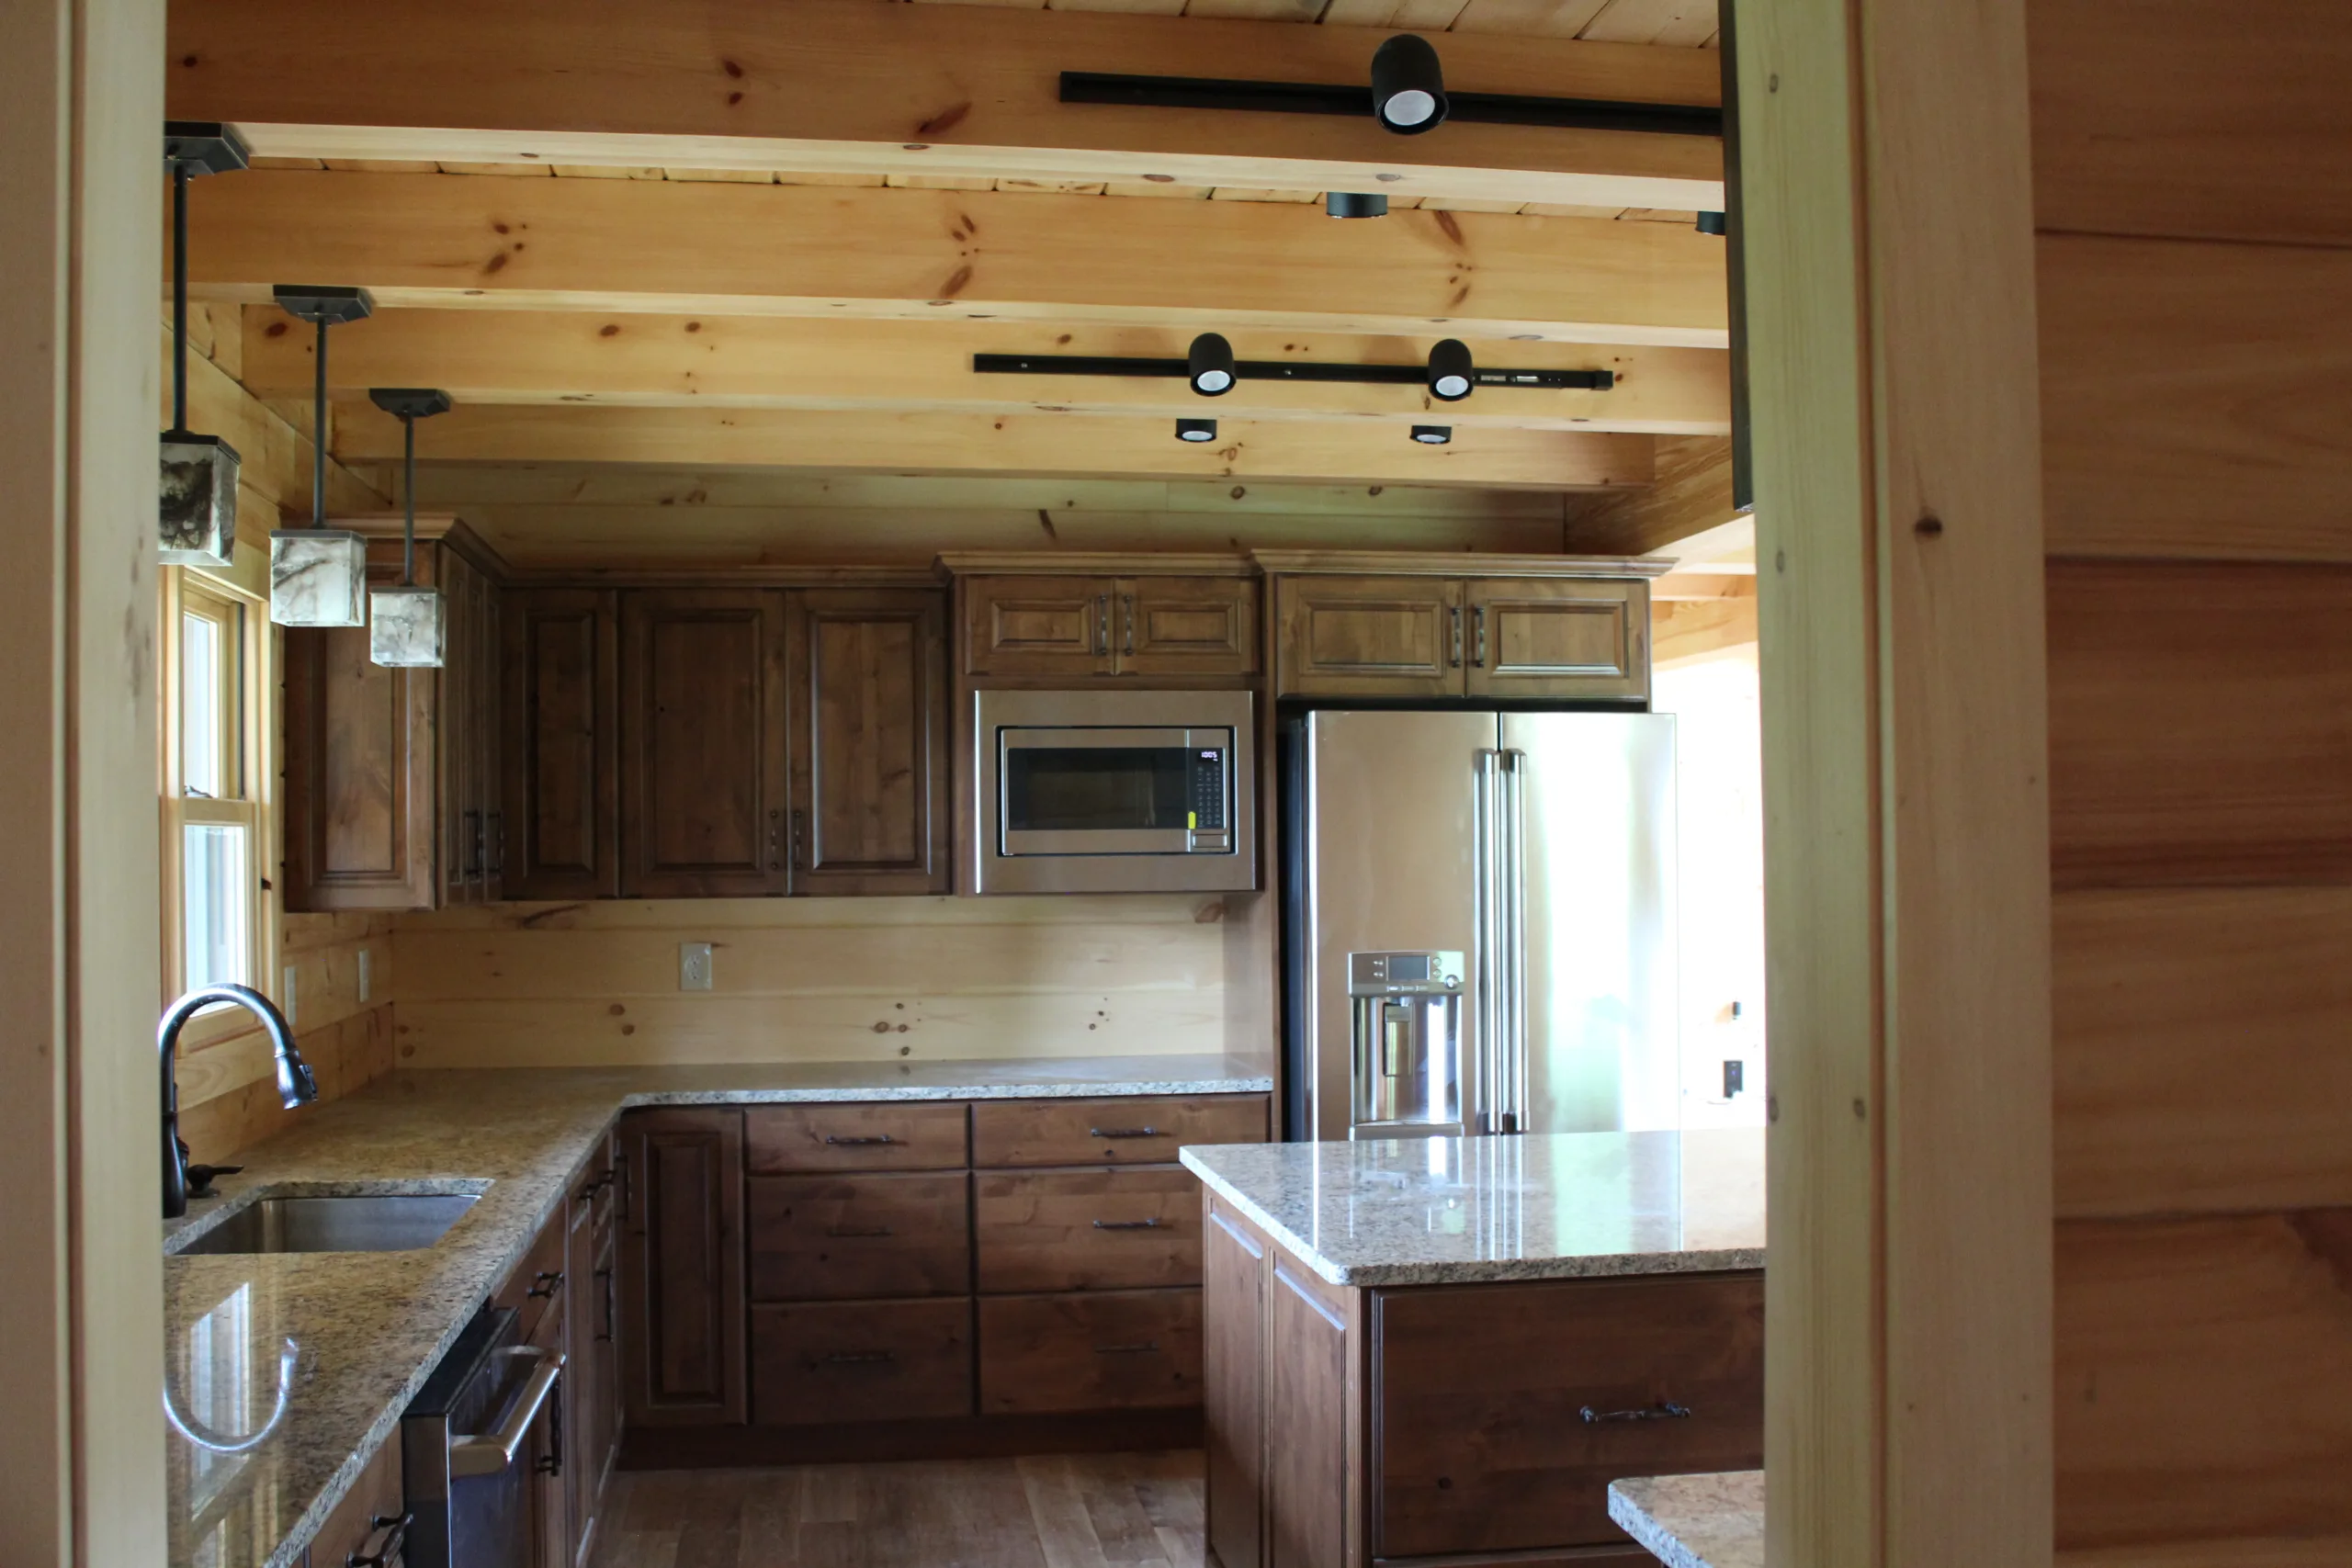 A view of a kitchen in a log cabin.